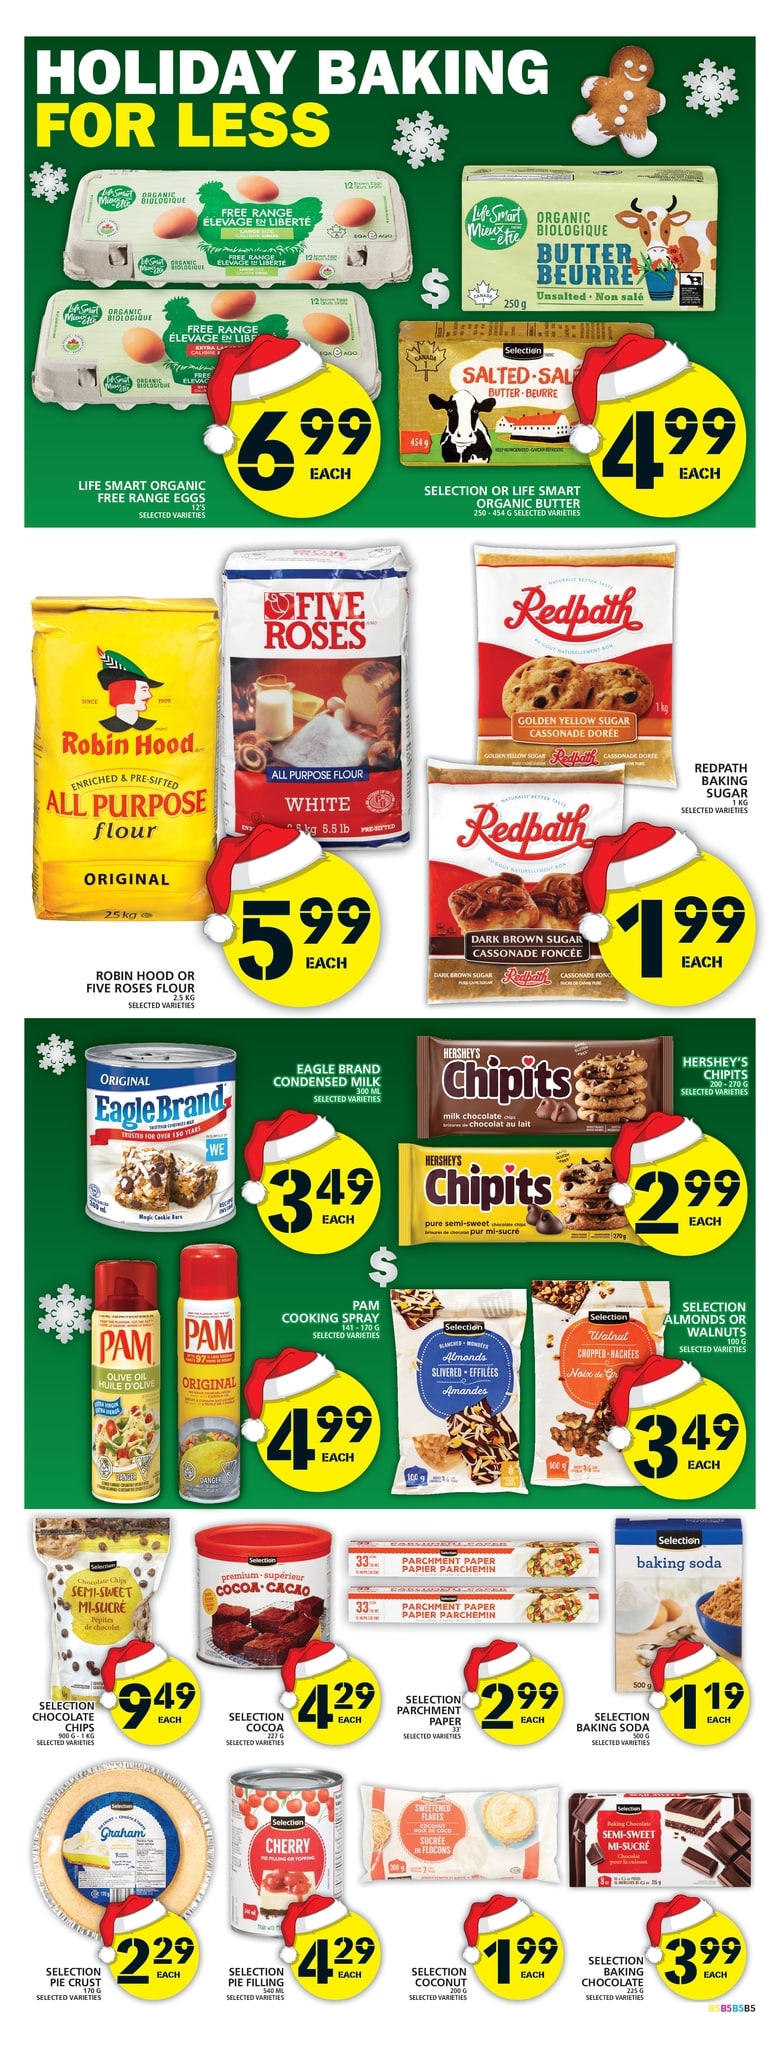 Food Basics - Weekly Flyer Specials - Page 5